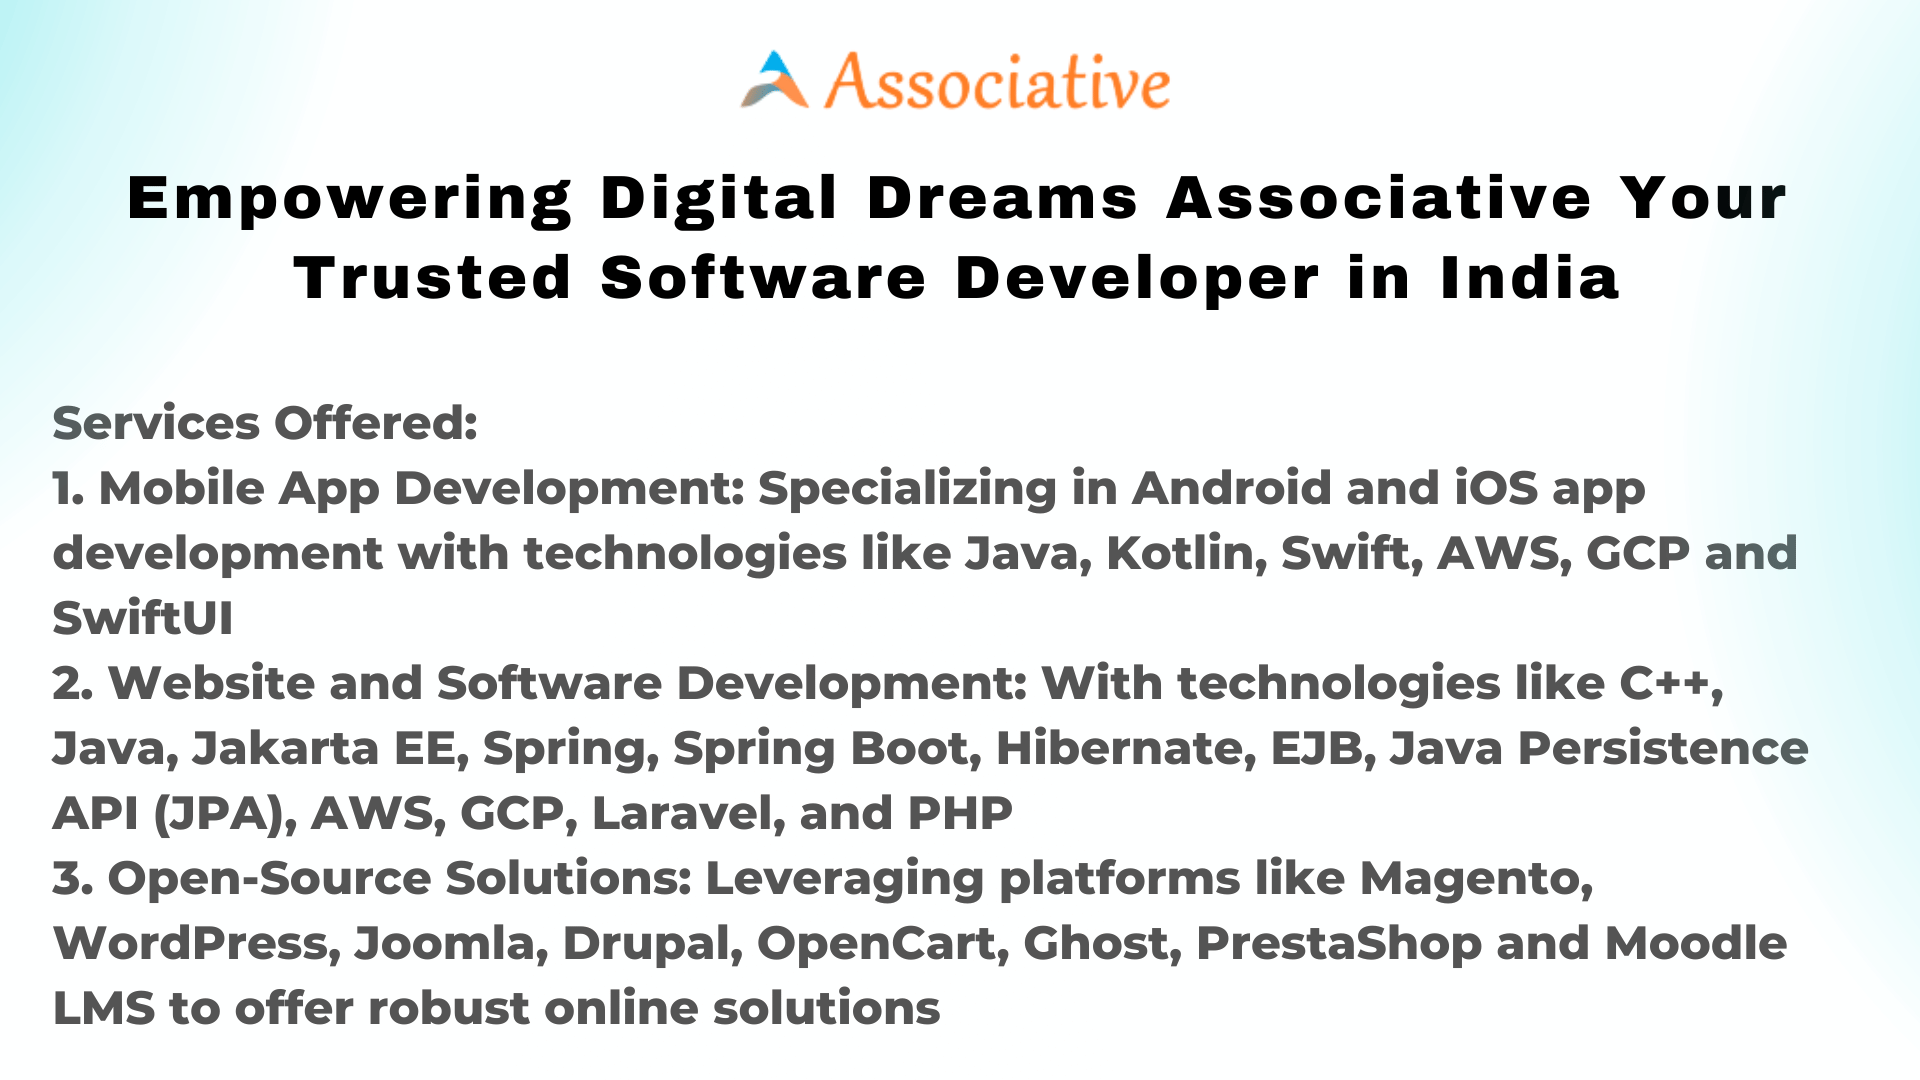 Empowering Digital Dreams Associative Your Trusted Software Developer in India